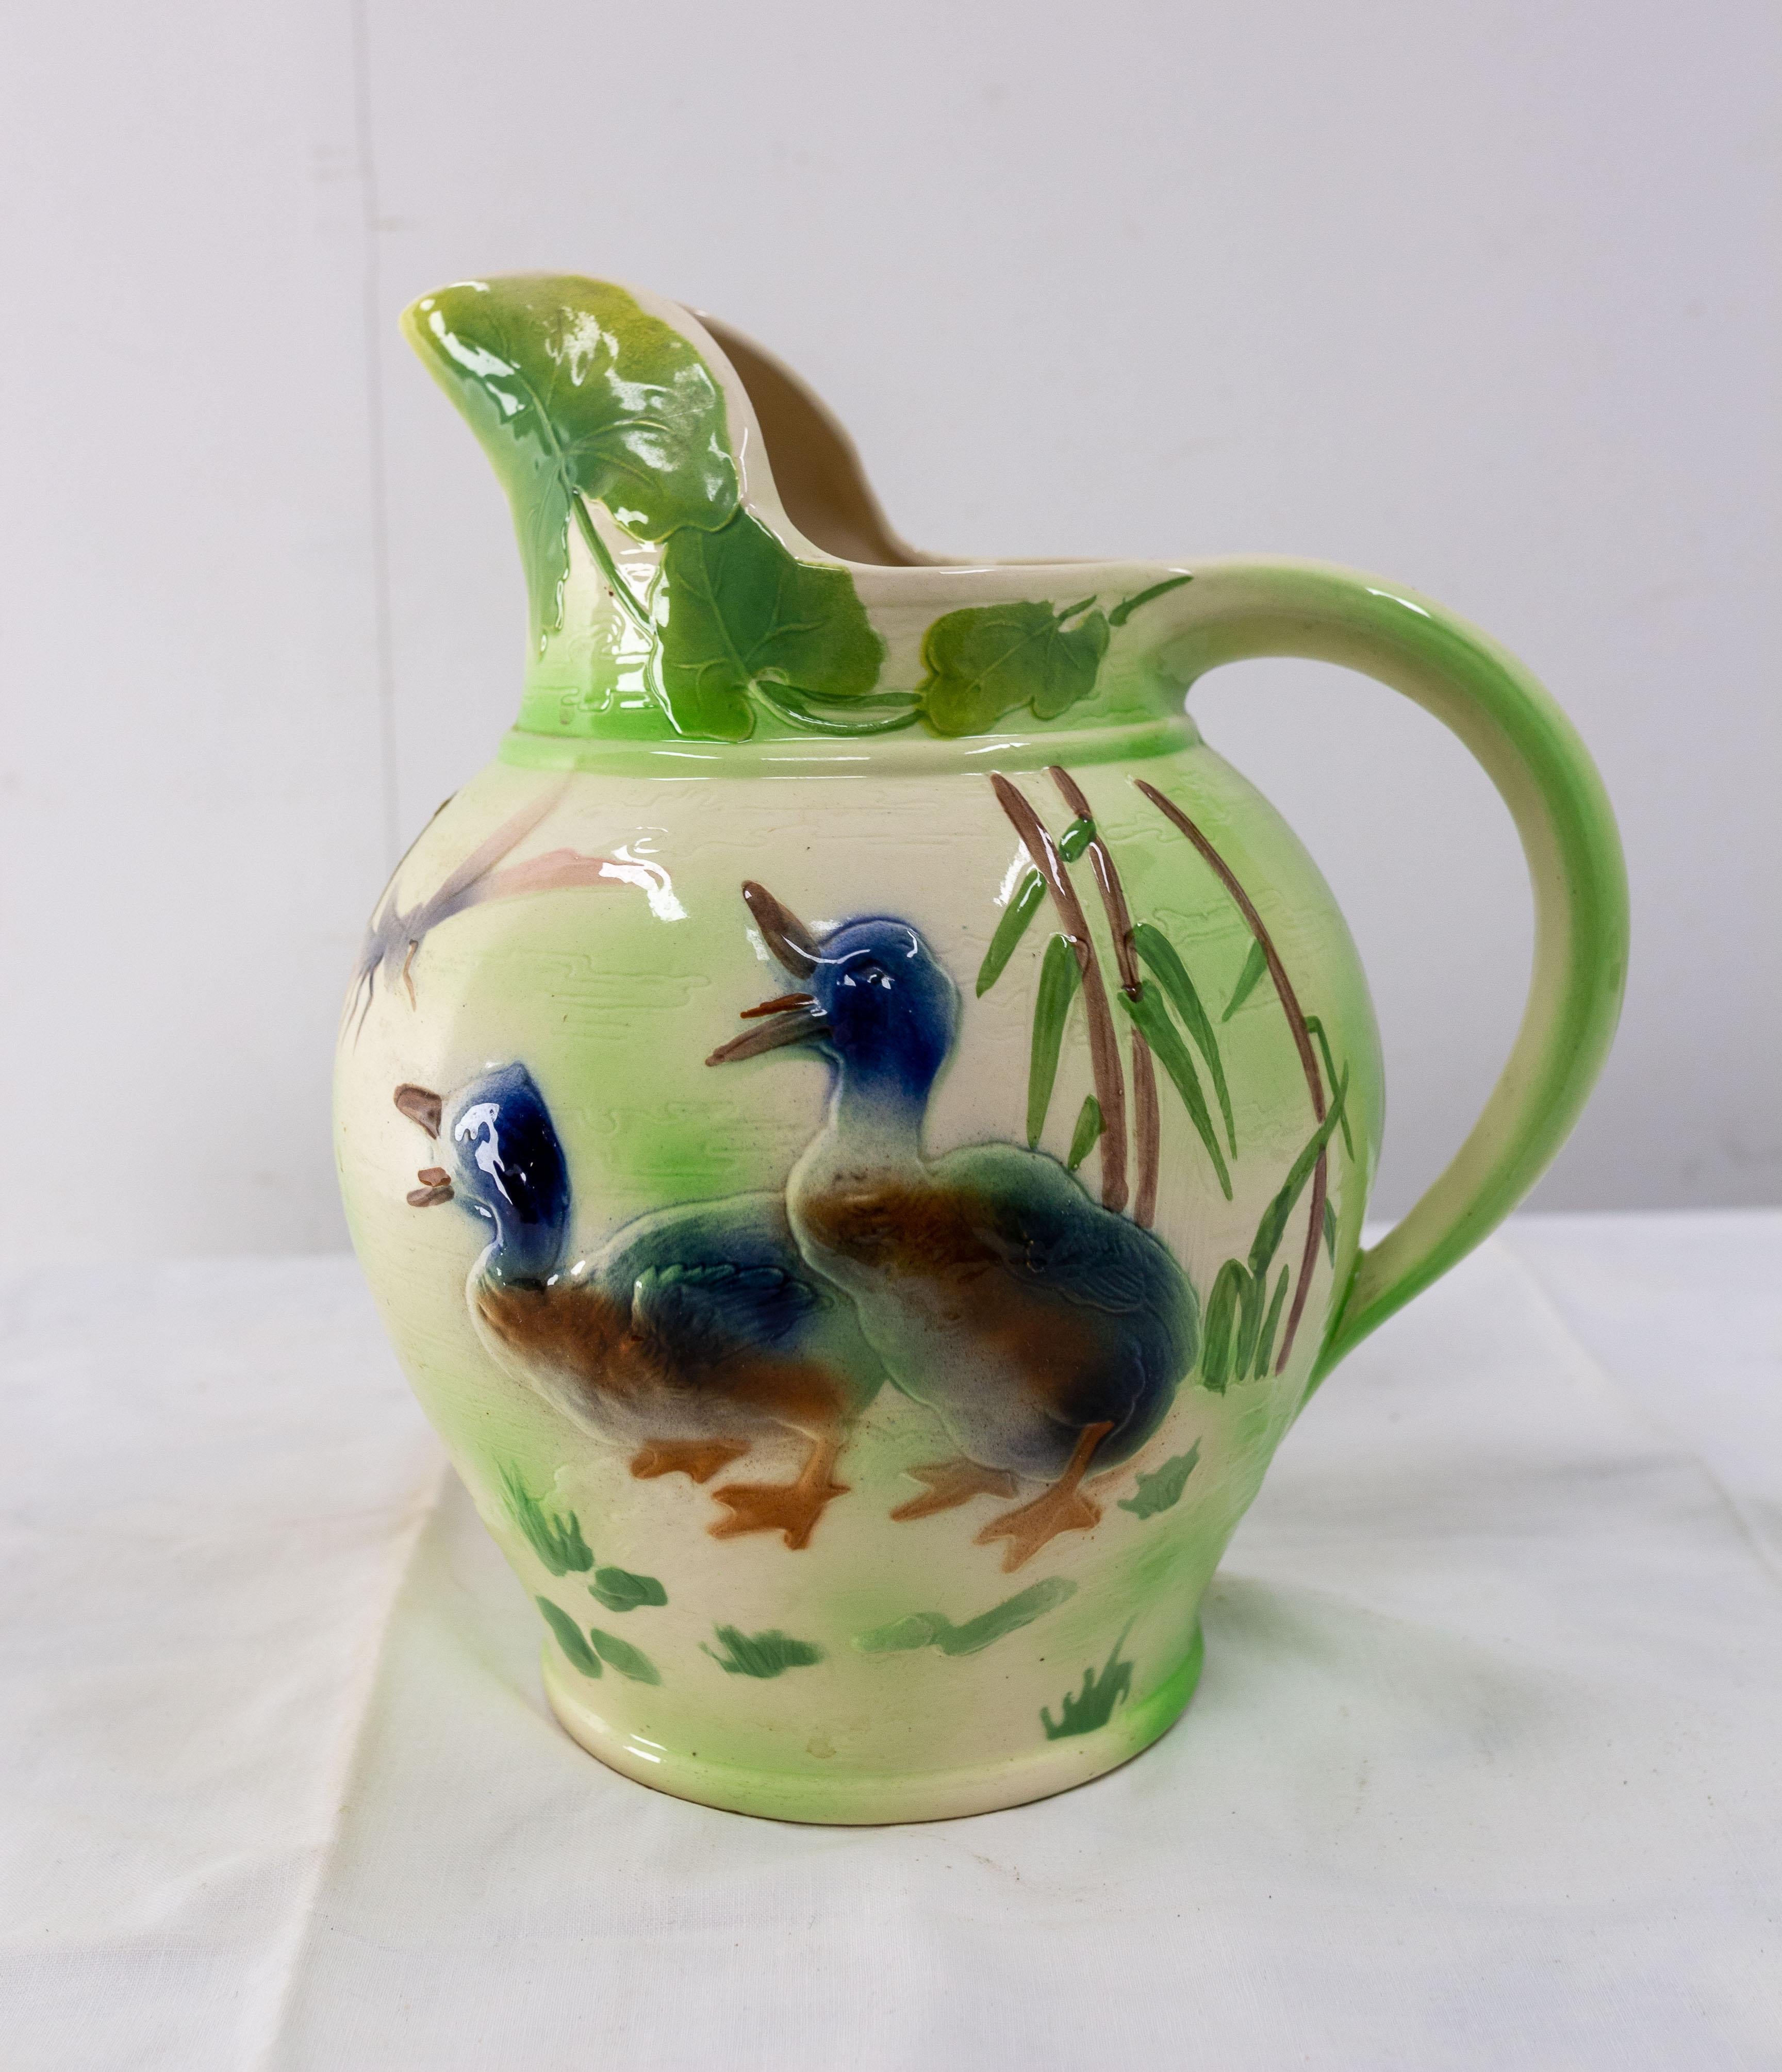 Faience Pitcher représenting two ducks in a vegetal decor.
Made circa 1960, in the 1900 style, France.
The Faincerie de Saint-Clément is the heiress of the prestigious faience of Lorraine since the eighteenth century. The Saint-Clément factory was